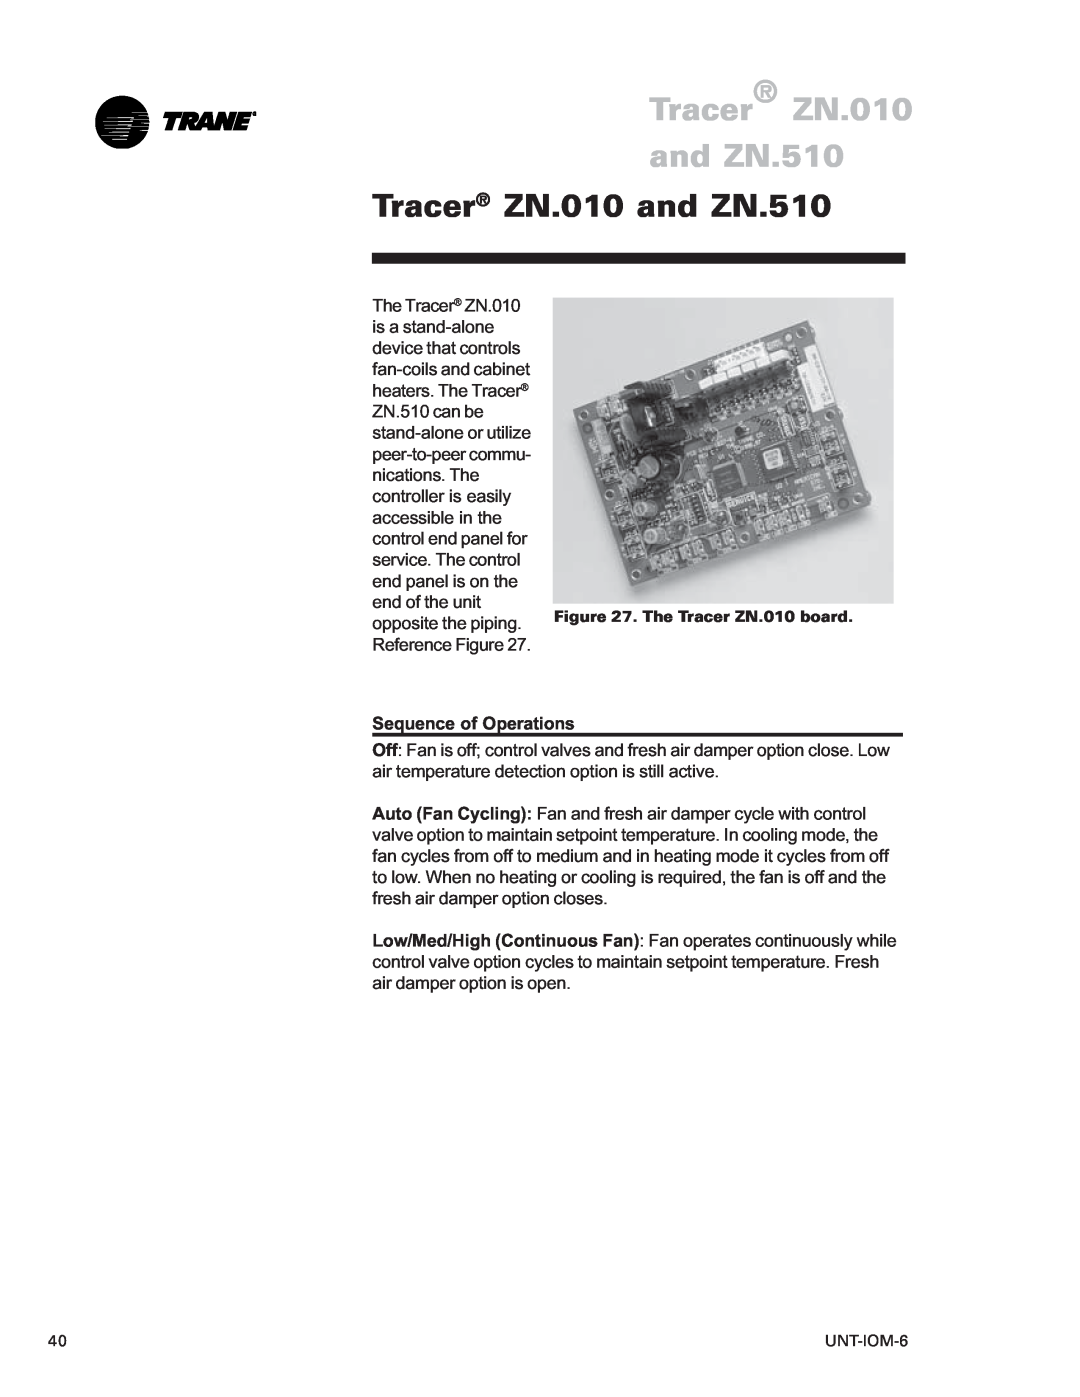 Trane LO manual Tracer ZN.010 and ZN.510, Sequence of Operations 